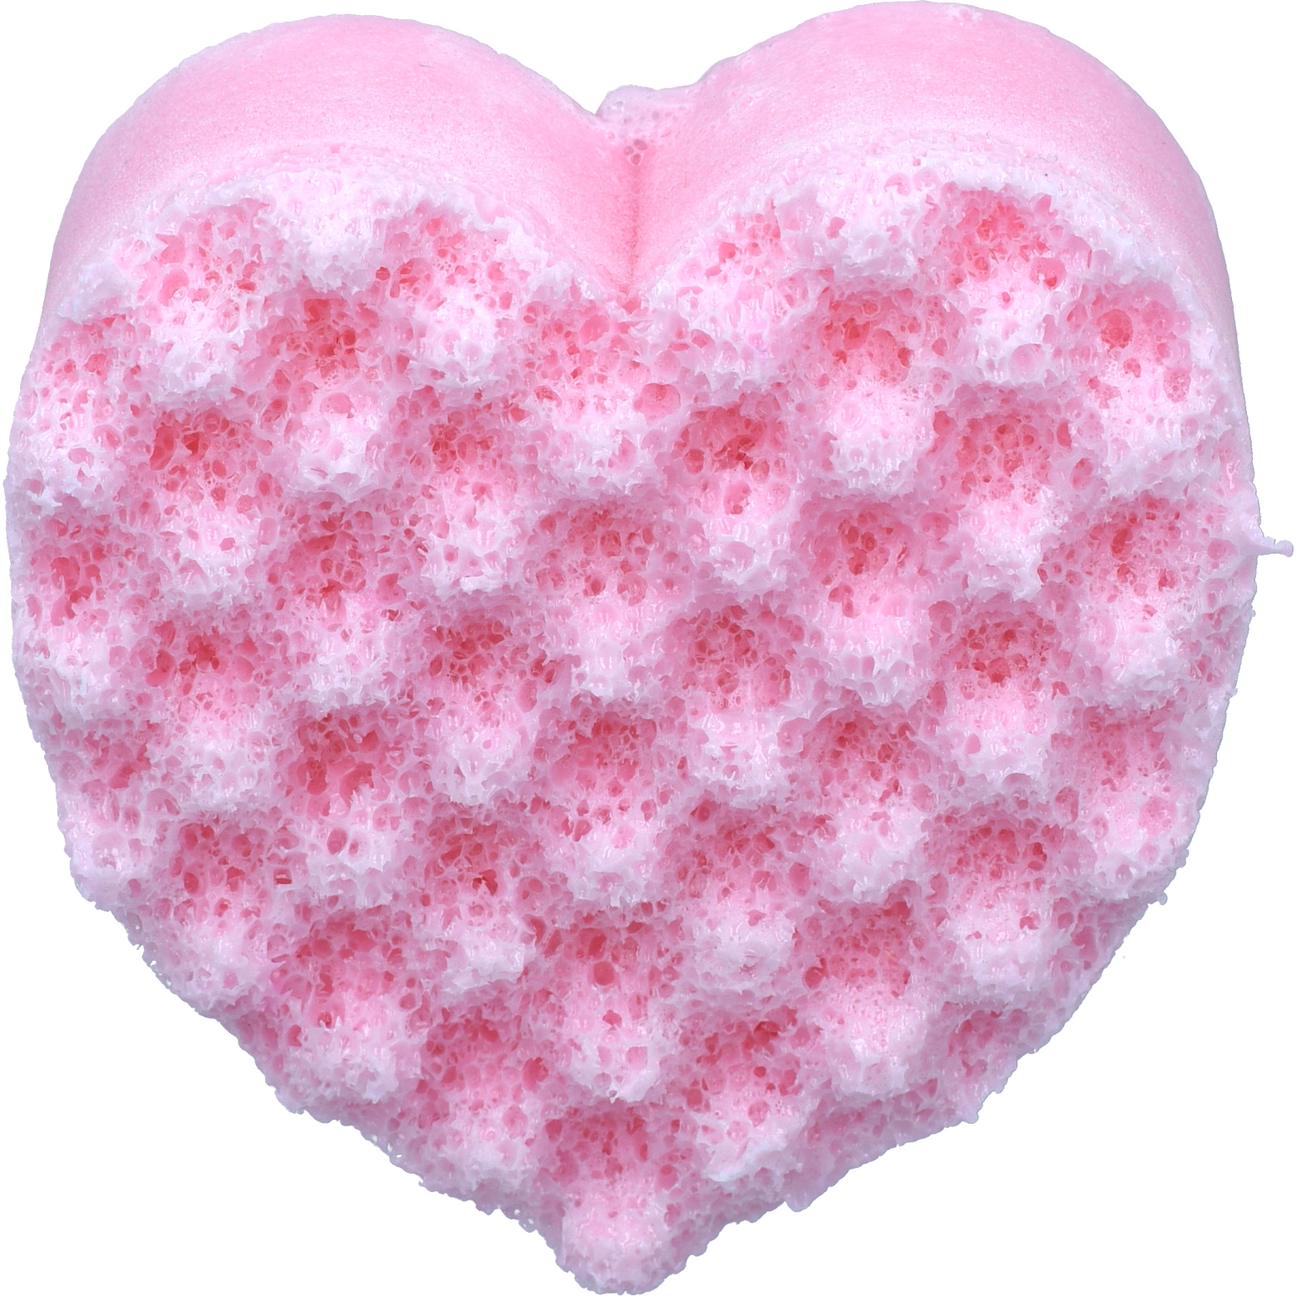 Rose and Oud Heart Shaped Body Buffer